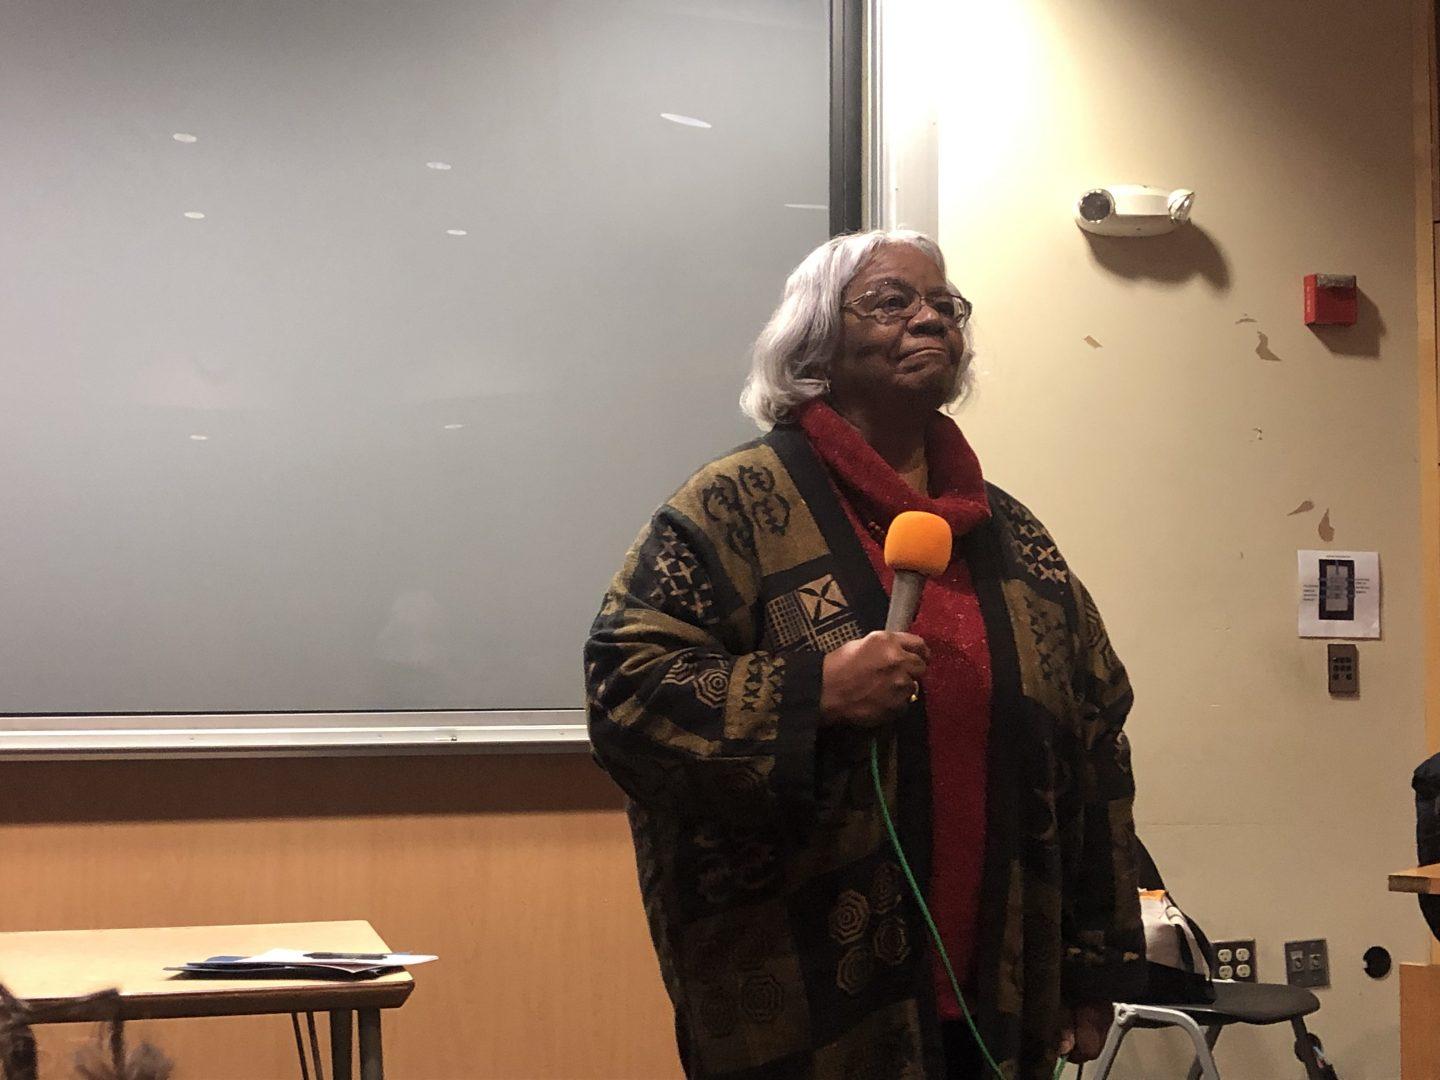 Dr. Margaret Wilkerson leading the discussion after film “Lorraine Hansberry: Sighted Eyes/Feeling Heart” which was shown in front of the CineCulture audience on Feb. 22. (Andrea Marin Contreras/The Collegian)